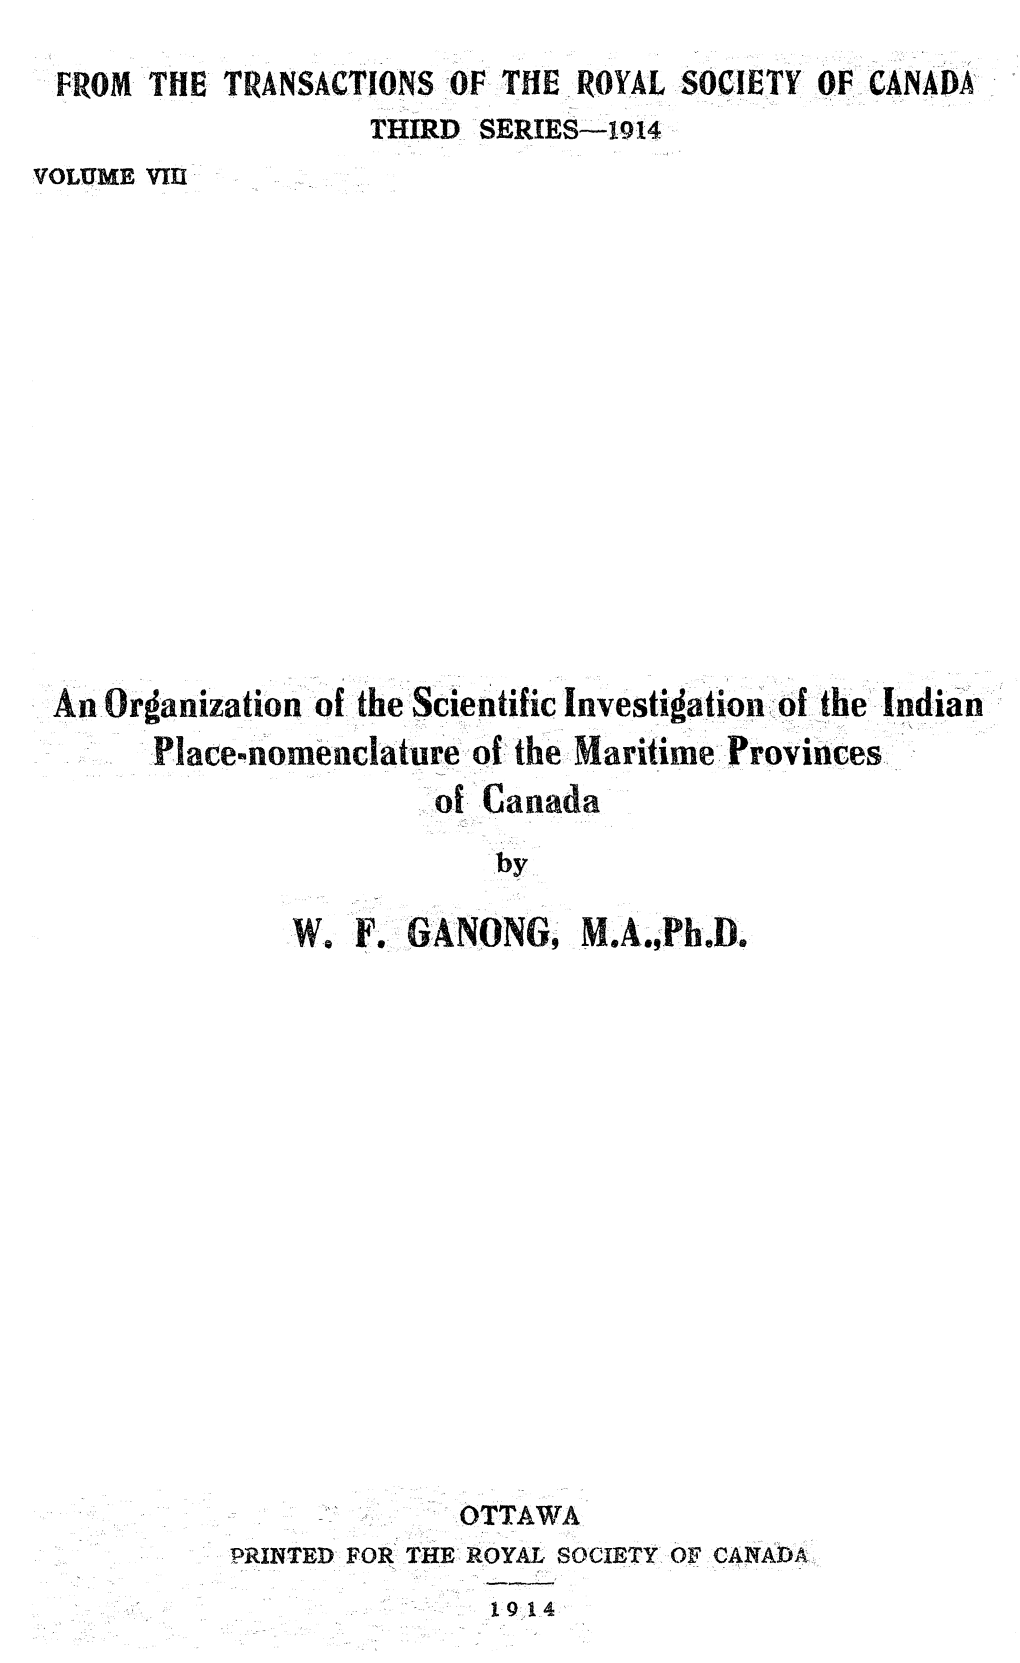 An Organization of the Scientific Investigation of the Indian Place«Nomenclatiire of the Maritime Provinces of Canada by W